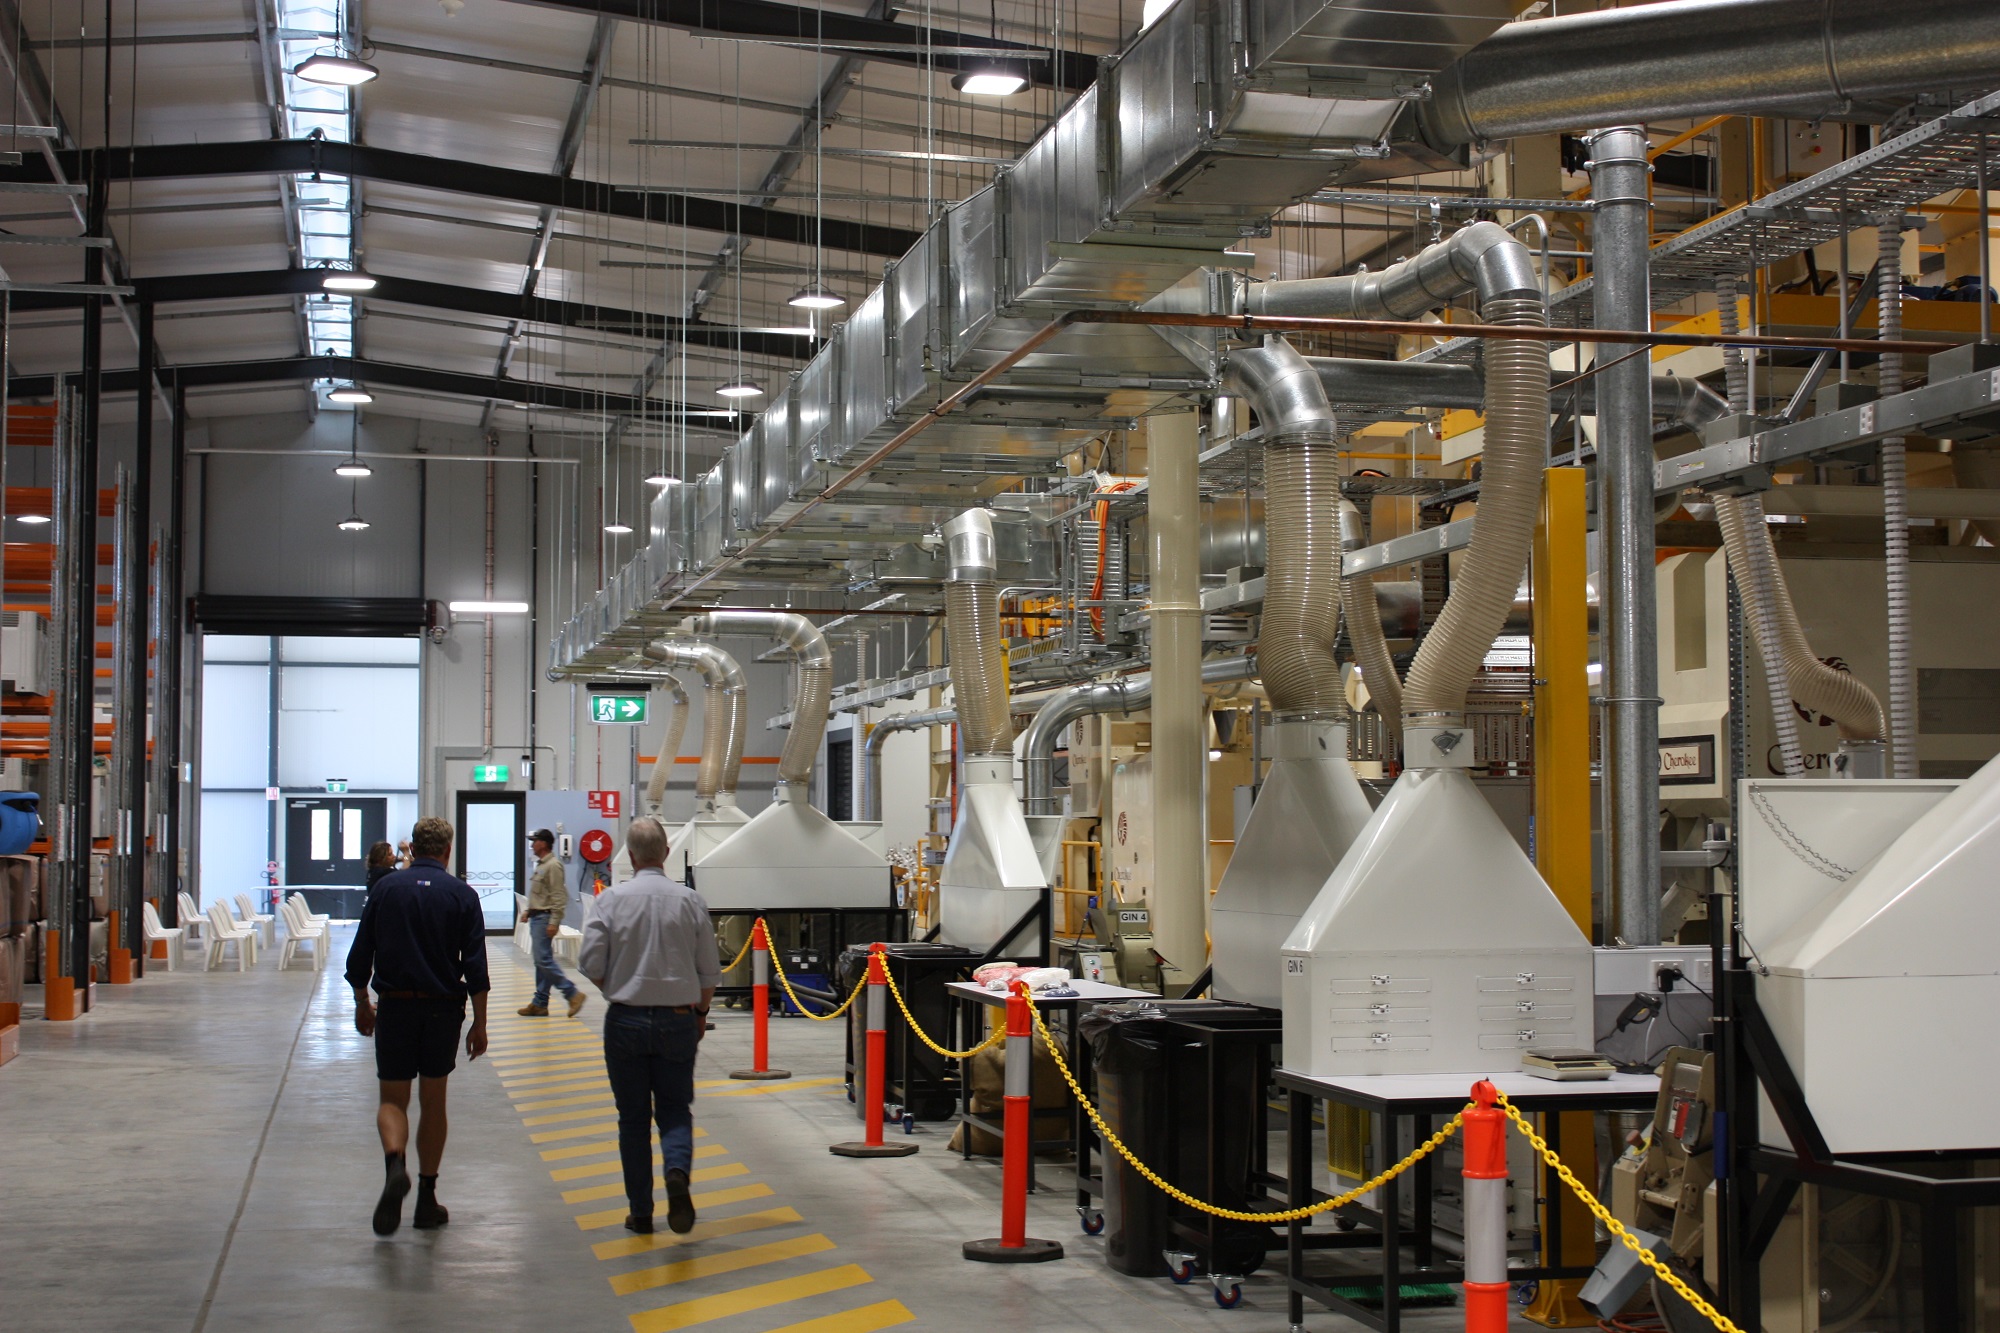 The impressive new facilities at CSIRO’s Myall Vale site will allow cotton research to reach new heights.